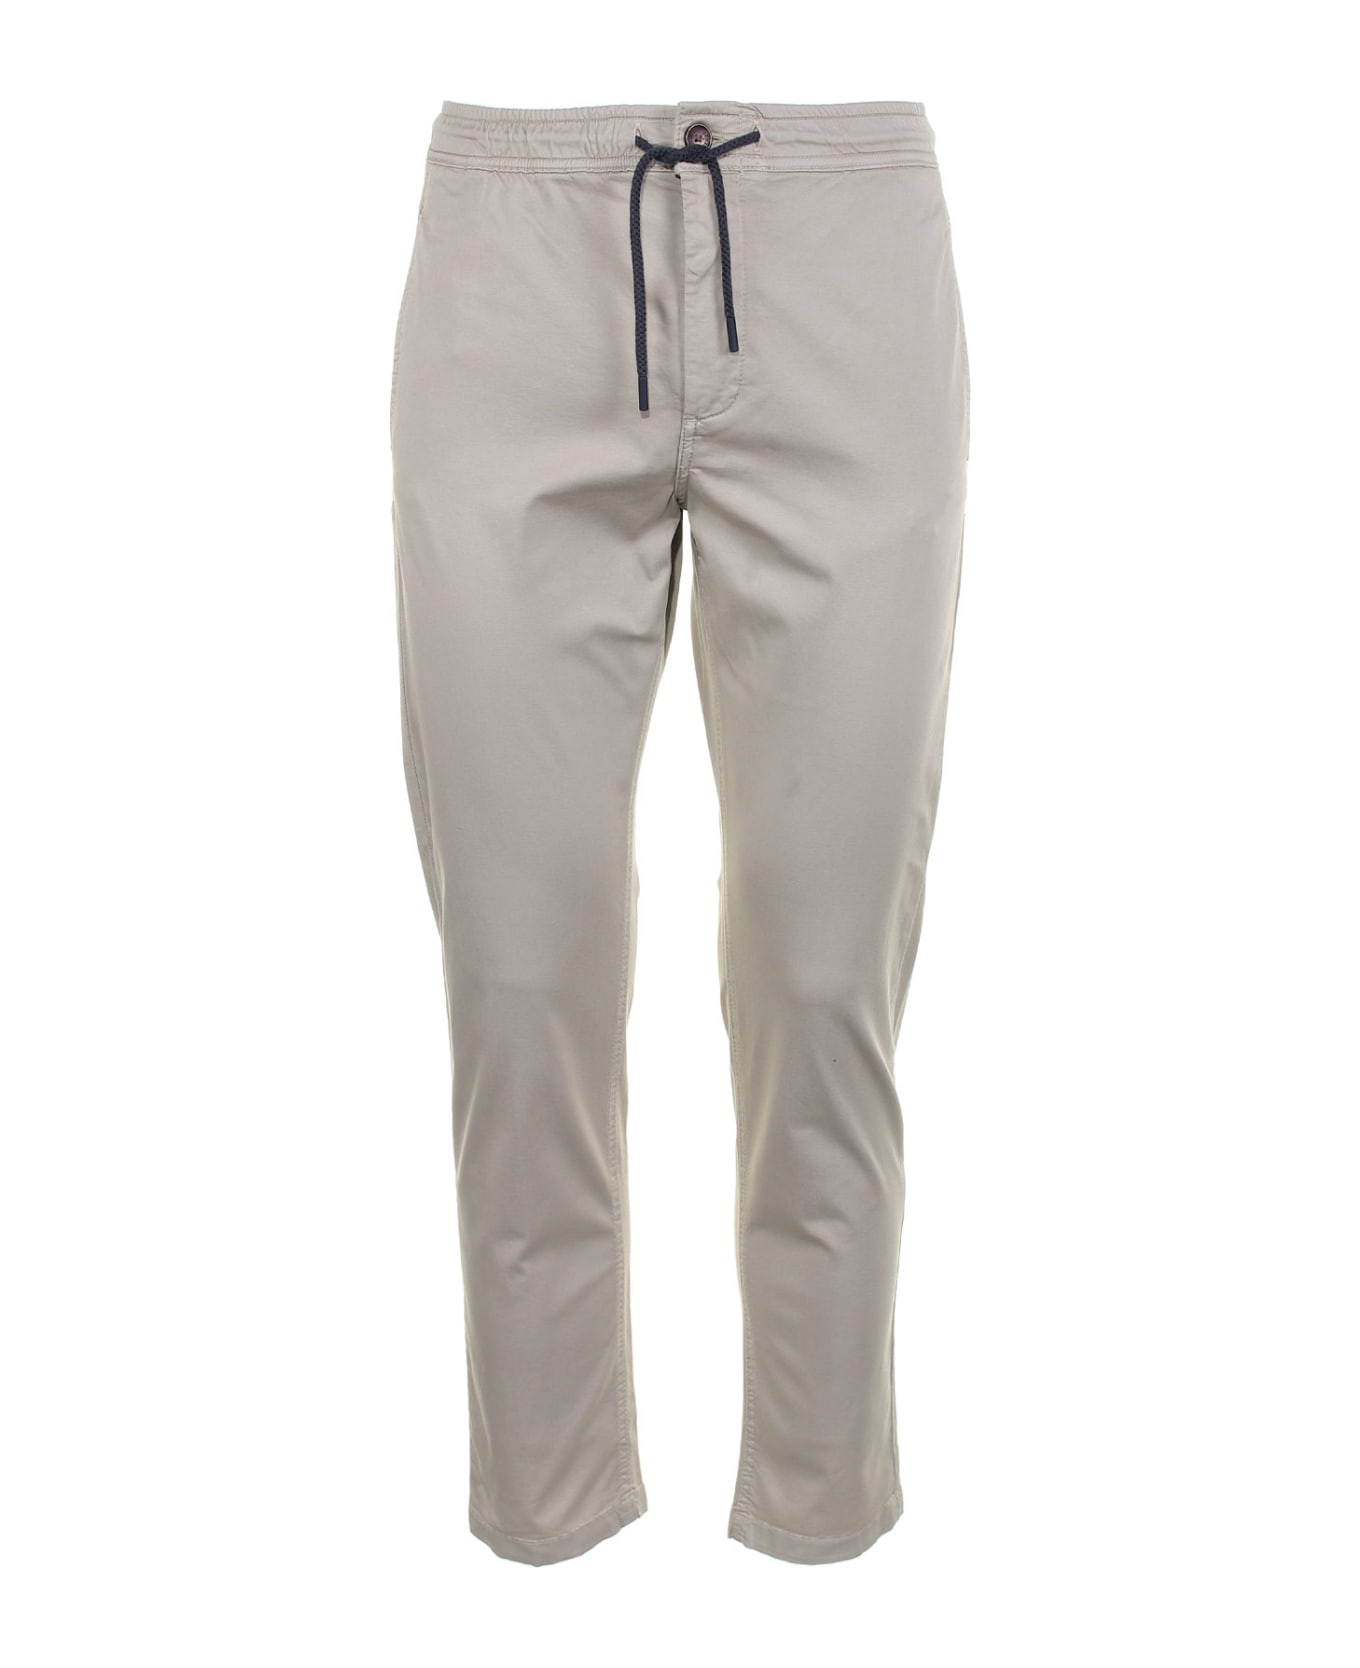 Ecoalf Trousers With Drawstring At The Waist - STONE